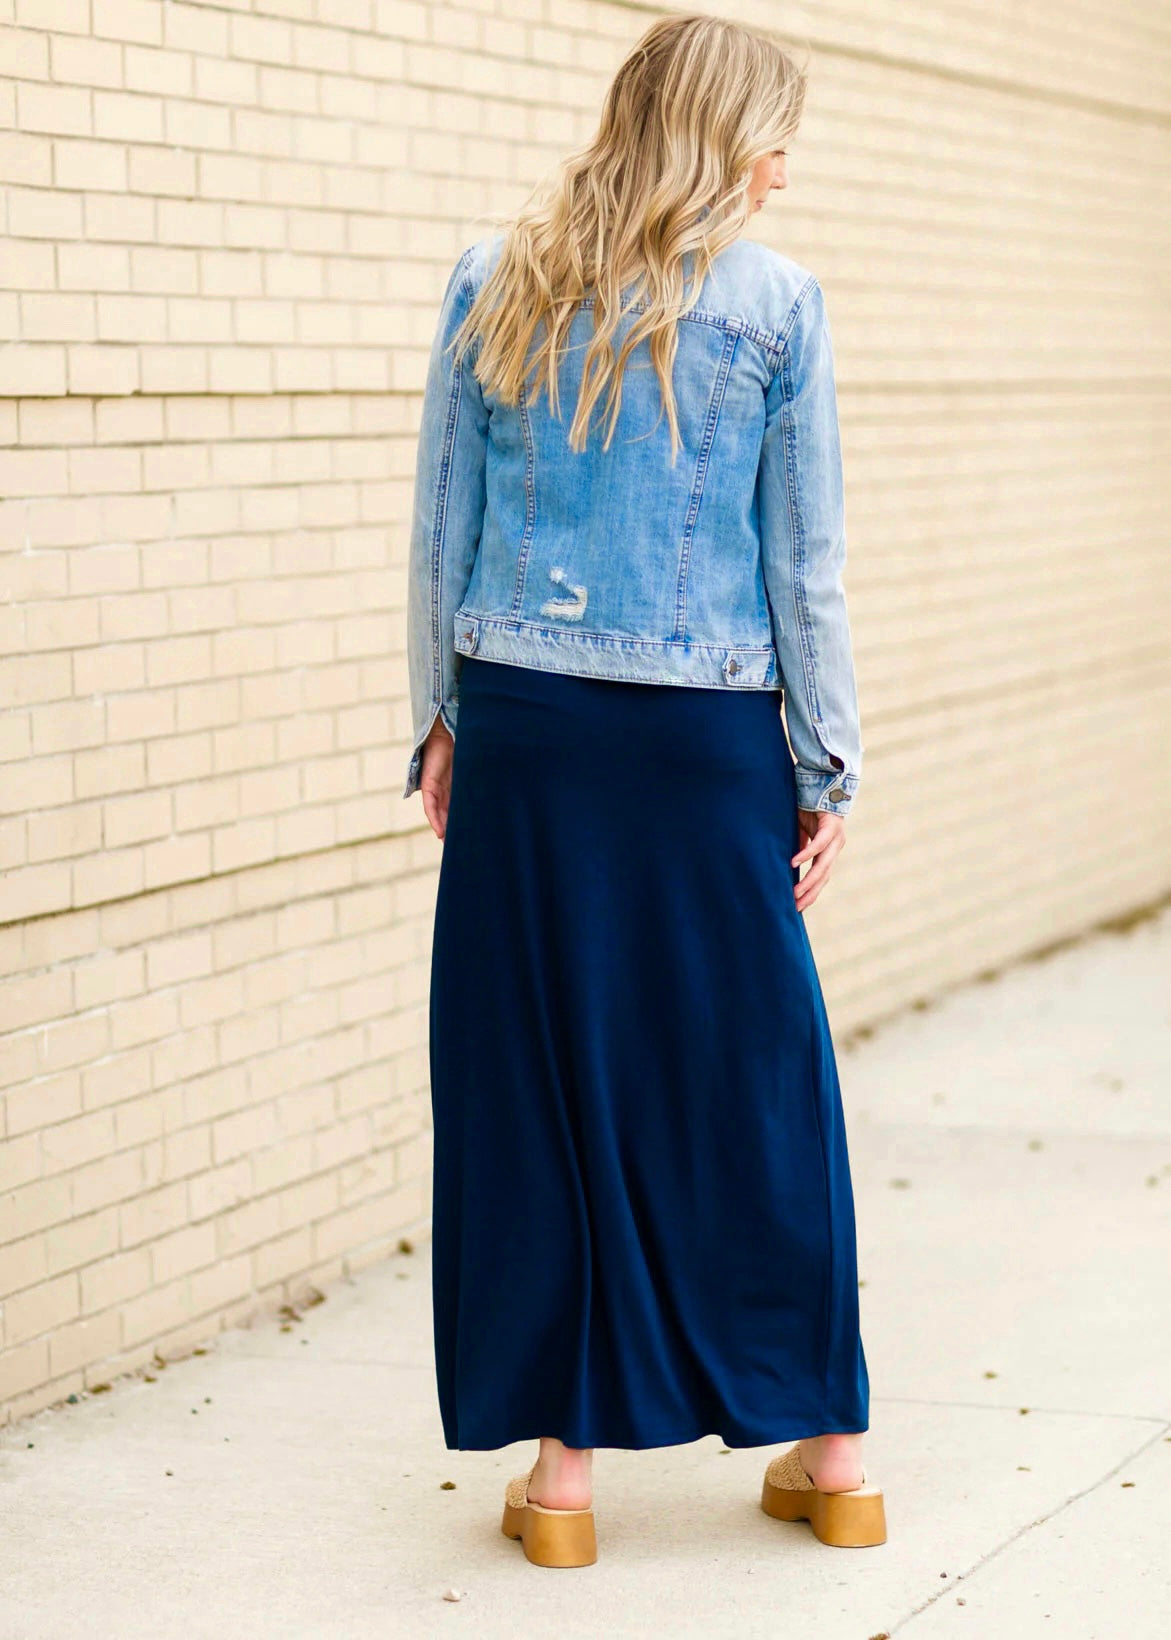 Rear view of a young blonde woman wearing a denim jacket and navy blue Maxi Skirt with Pockets featuring a Soft & Stretchy Premium Fabric Blend, Adjustable Drawstring Tie Waist, and Pockets. Available in sizes S-3XL in both solid Black or Navy Blue. Discover our Best Selling All-year All-season Maxi Skirt for every body shape & size. 